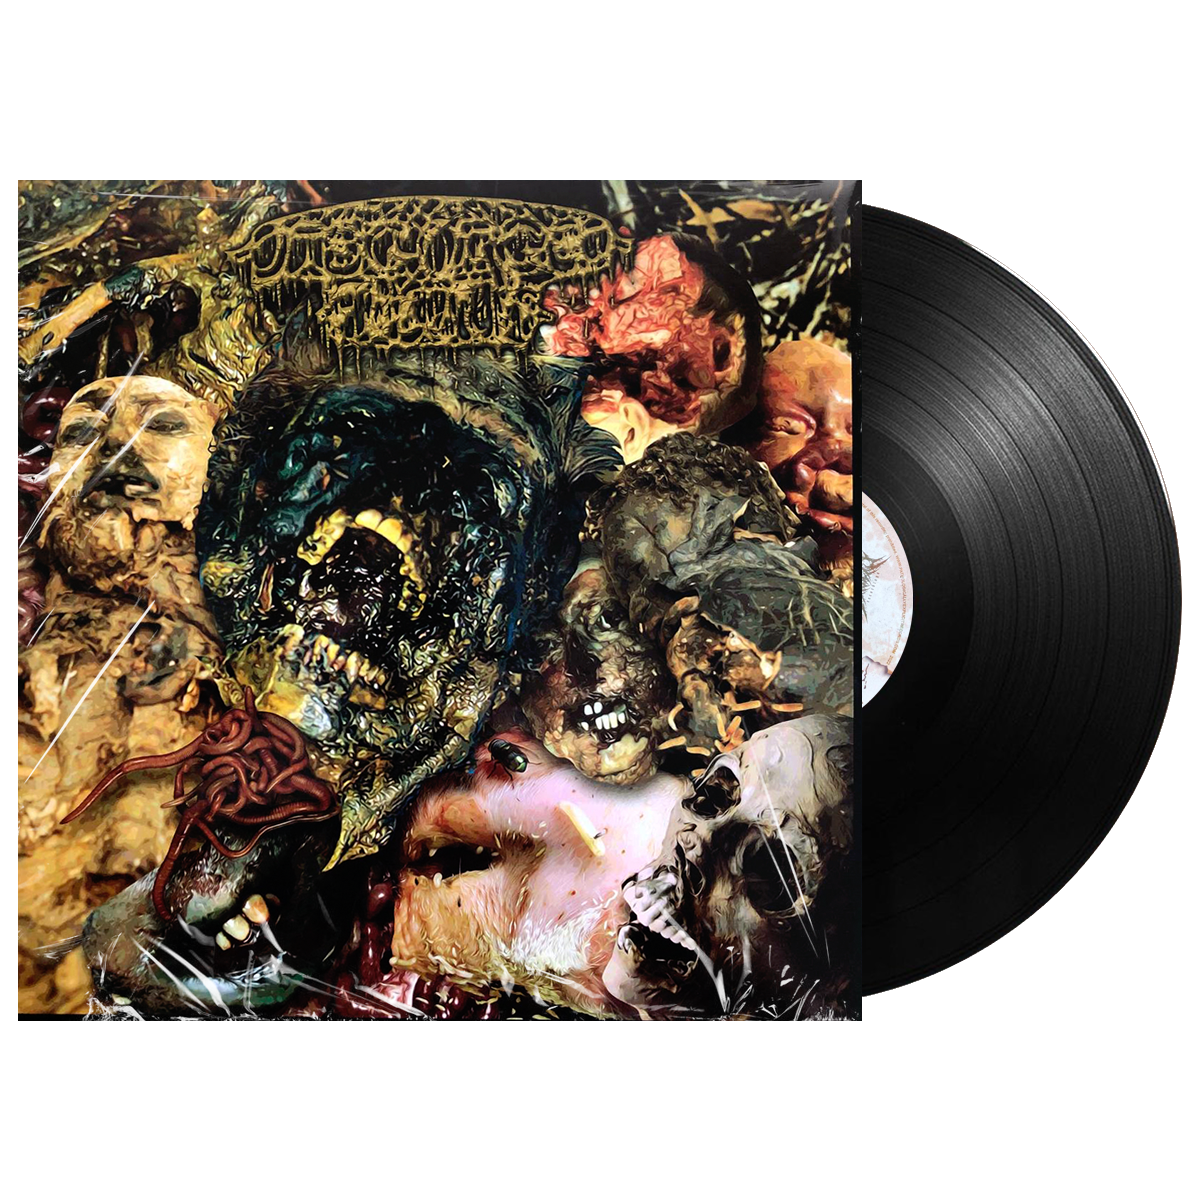 Disgorged Foetus 'the GORE collection' LP